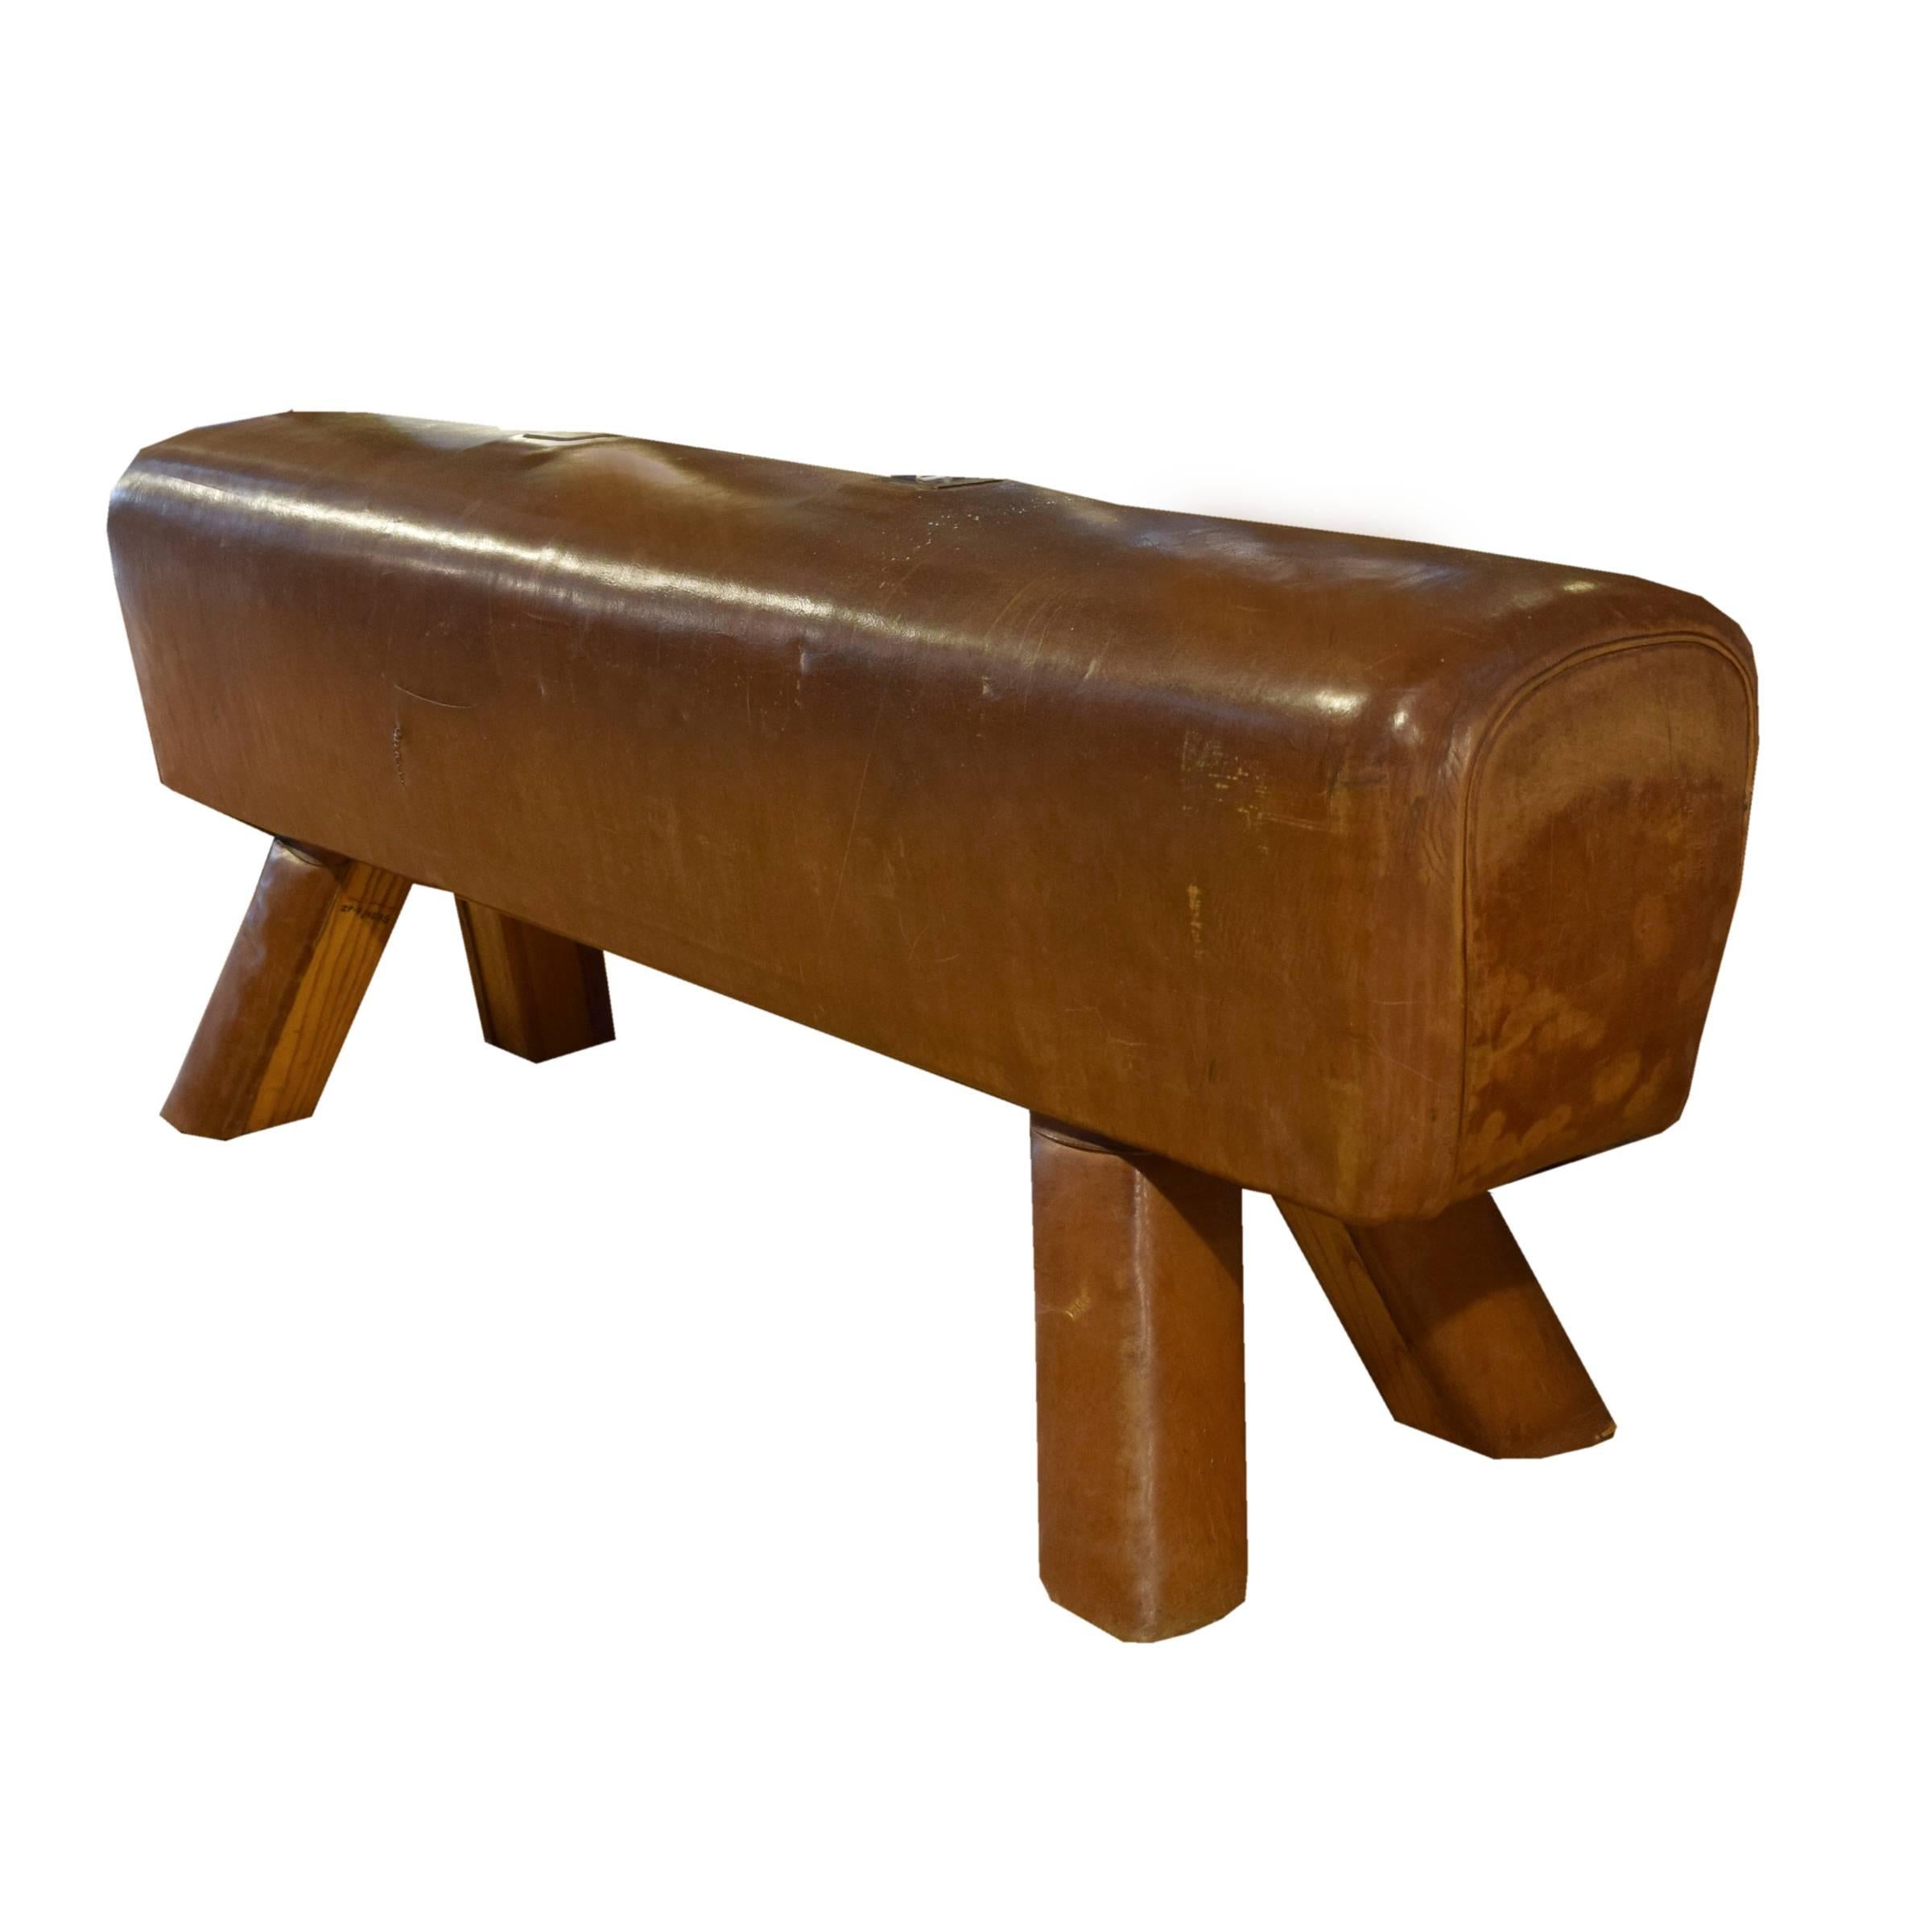 A fantastic early 20th century Czech leather pommel horse bench with leather covered wooden legs and custom steel plates covering the location of the original handles.
 